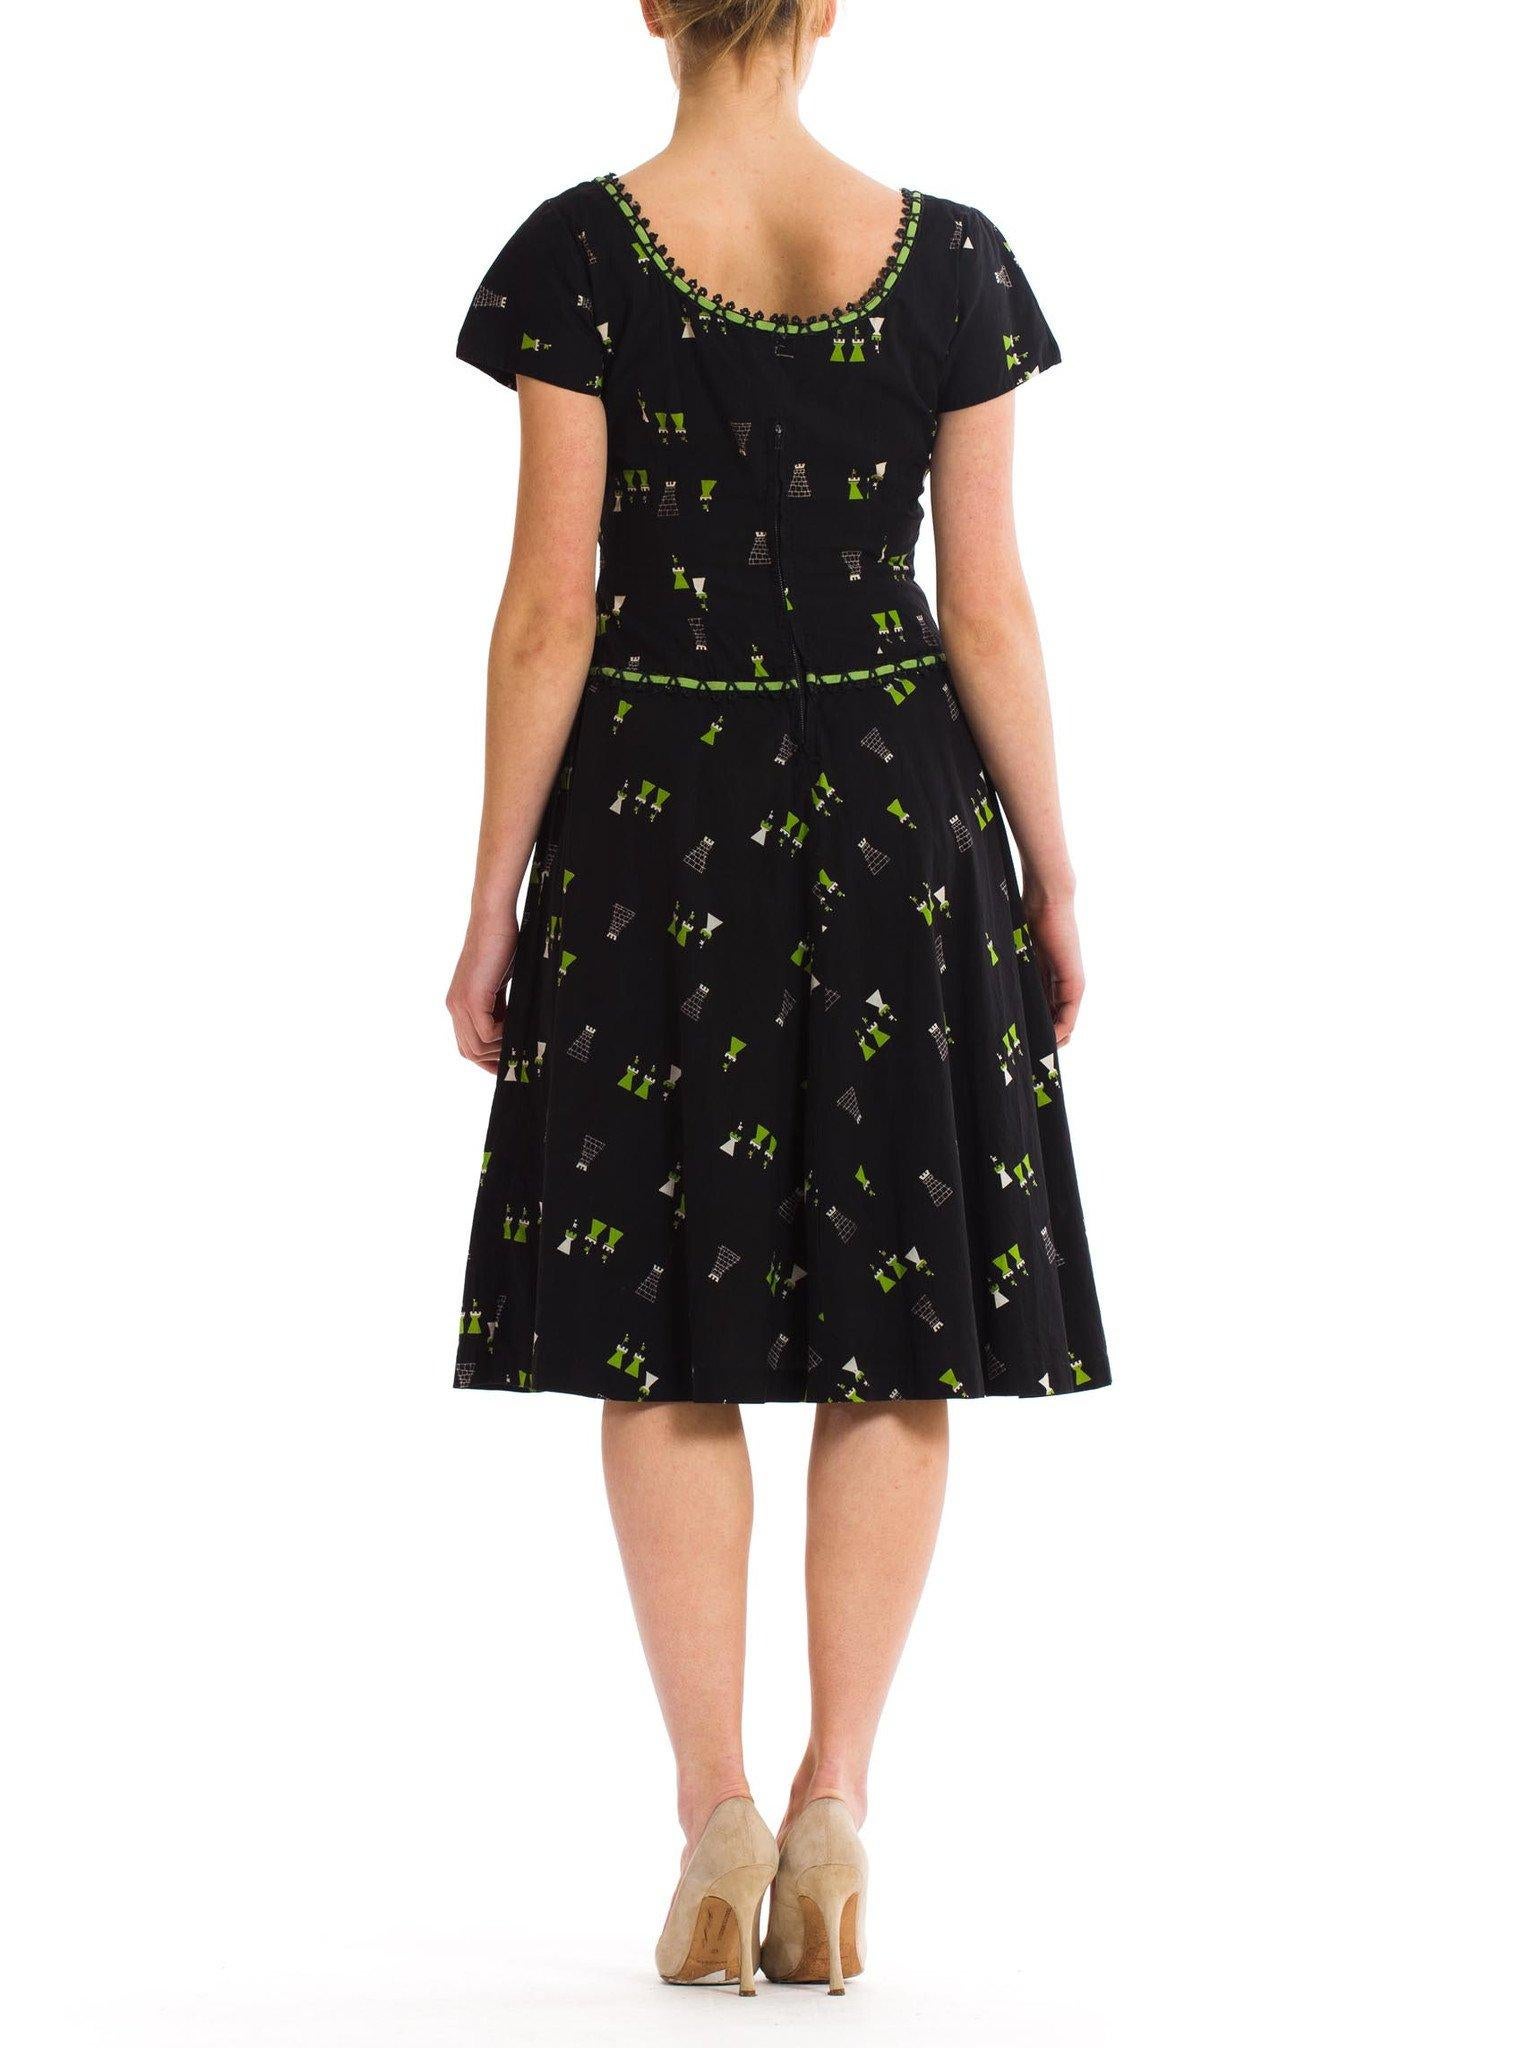 1950S Black Cotton Day Dress Printed With Cute Green Castles For Sale 4